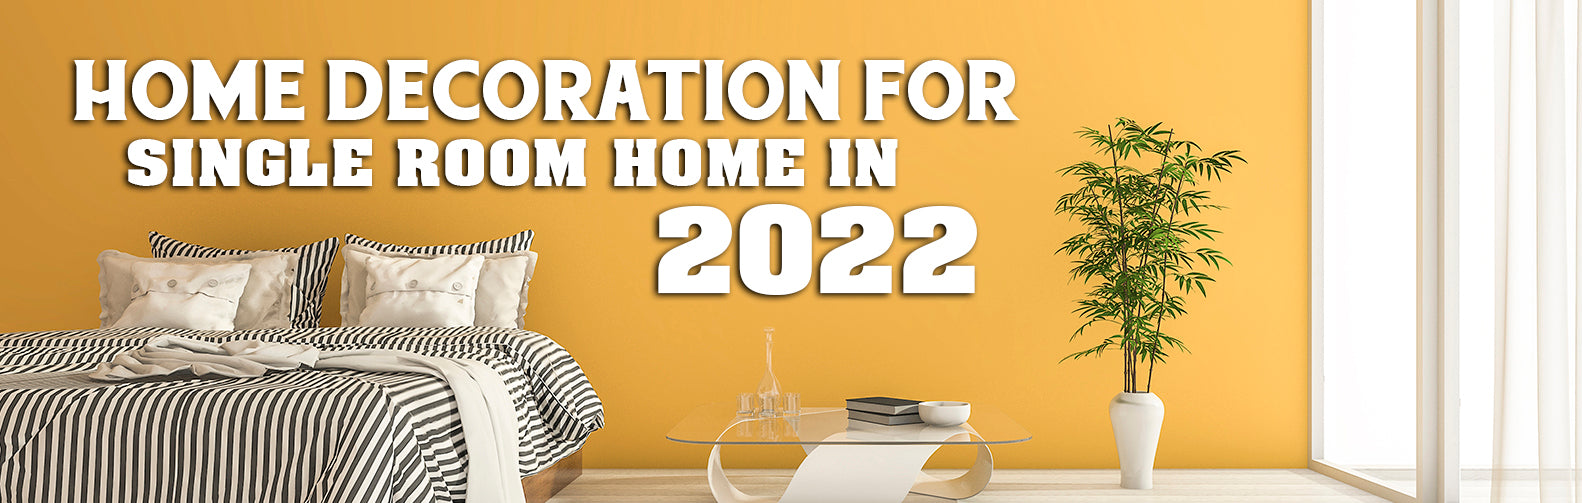 Home decoration for Single Room Home in 2022 - Tiaracle